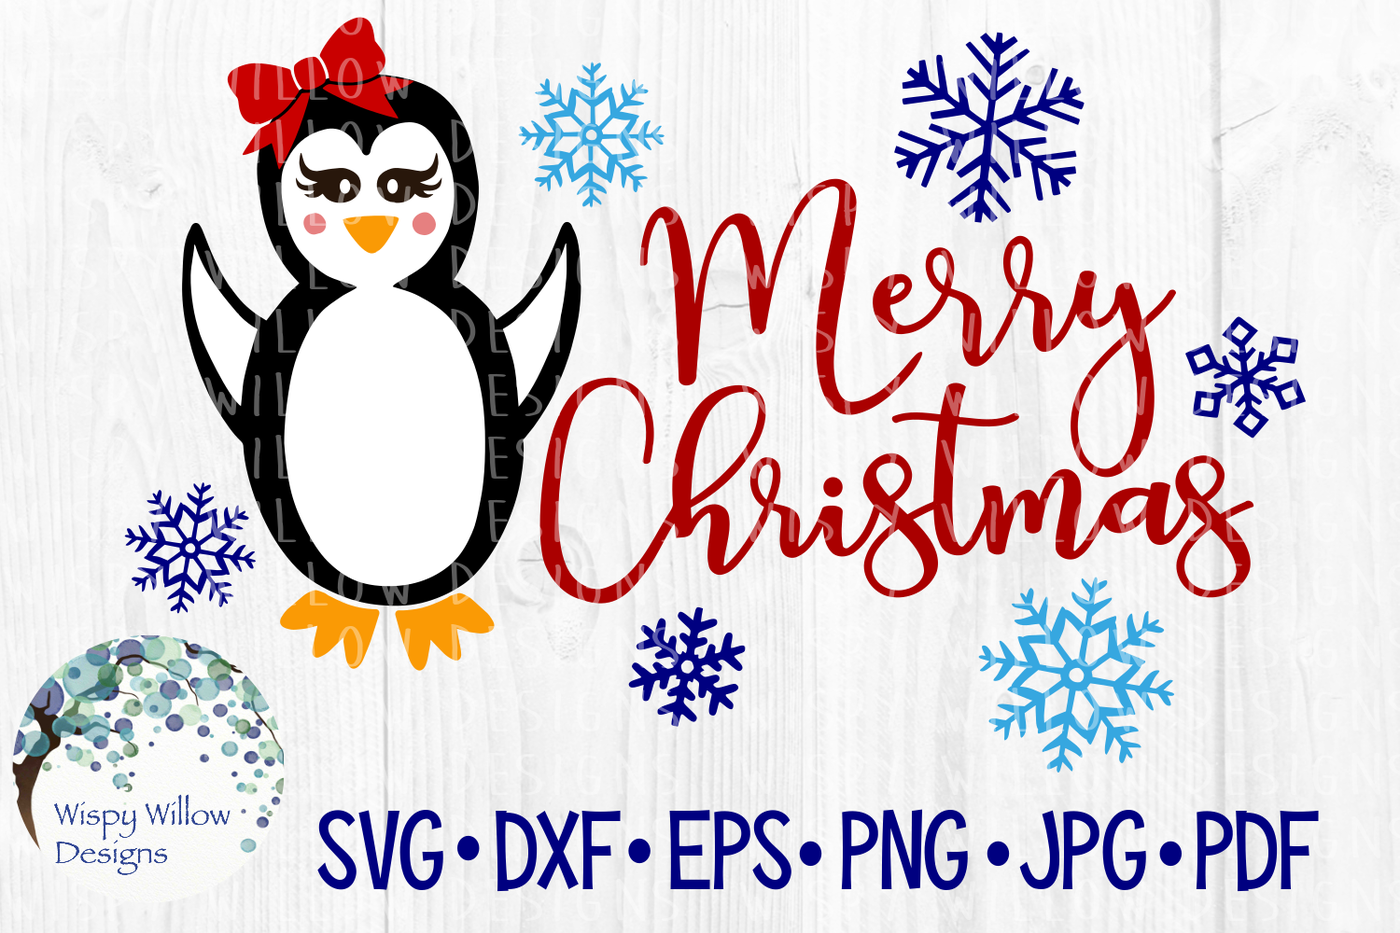 Merry Christmas Penguin Holiday Snowflake Svg Dxf Eps Png Jpg Pdf By Wispy Willow Designs Thehungryjpeg Com